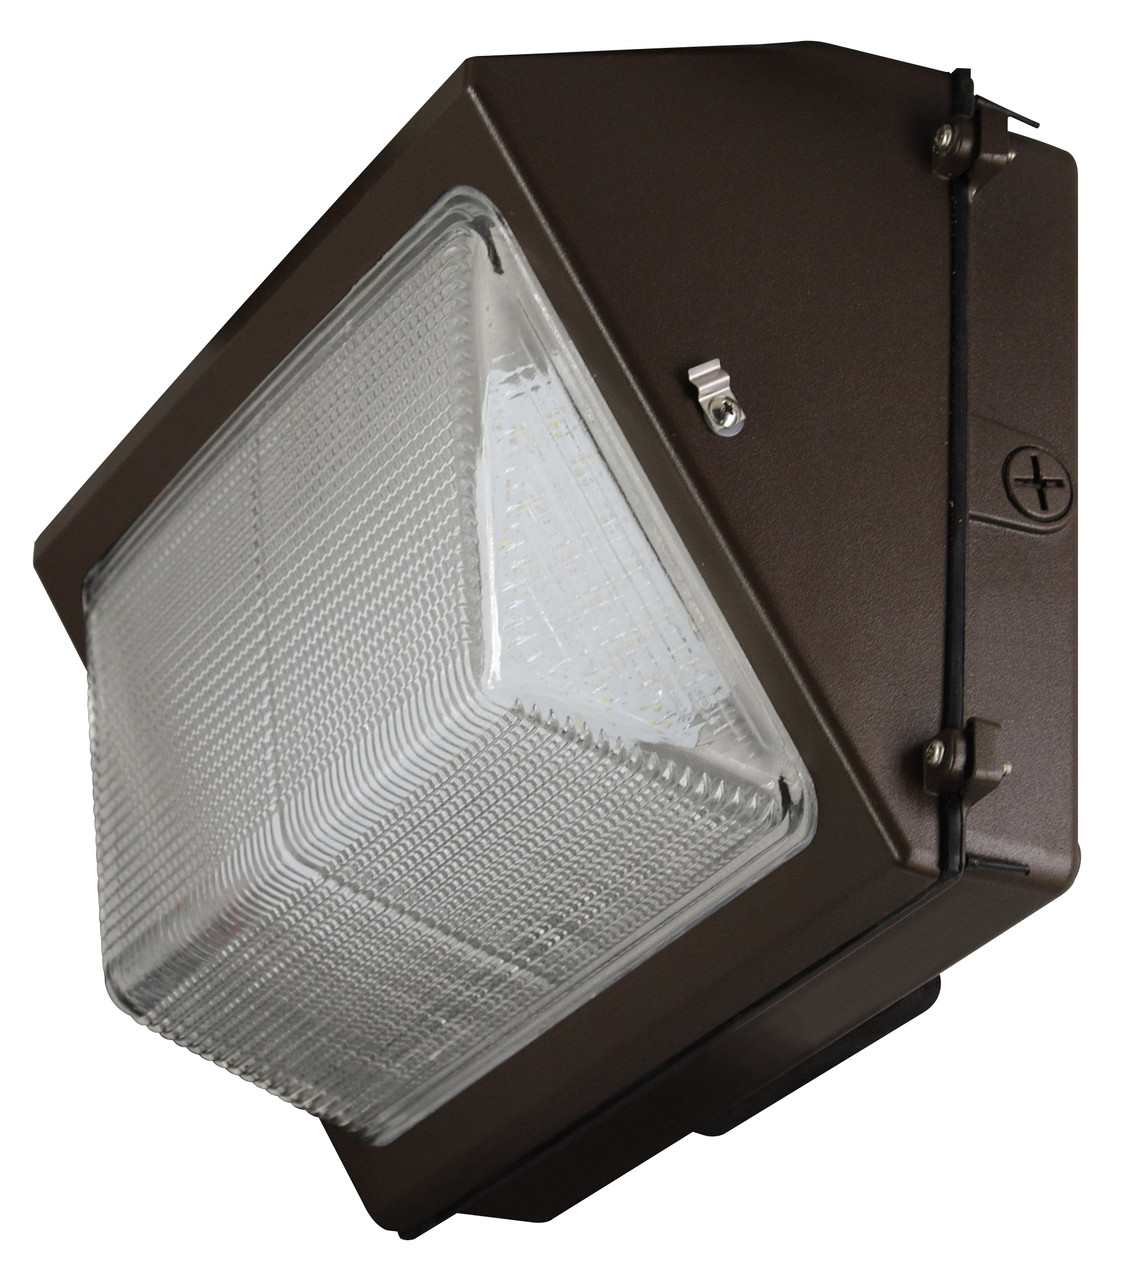 LED WALL PACK 120 WATTS 4000K & 5000K - The LEDWP120W is a rugged, durable LED wall pack, which is perfect for outdoor perimeter and area lighting. With a die cast aluminum housing and a vandal resistant, borosilicate glass lens, the LEDWP120W will stand up to many years of punishing environmental conditions. High-efficacy, long-life LEDs provide both energy and maintenance cost savings compared to traditional, HID wall packs.

▪ Available in 4000k (neutral white) and 5000k (cool white) color temperatures.*
▪ Long-life LEDs provide 56,000 hours of operation with at least 70% of initial lumen output (L70).**
▪ LEDWP60W models deliver 12,146 lumens and 101 lumens per watt (LPW) at both 4000k and 5000k.*
▪ Uniform illumination with no visible LED pixilation.
▪ Universal 100-277 AC voltage (50-60Hz) is standard.
▪ Power factor > 0.90.
▪ Total harmonic distortion < 20%.
▪ Color rendering index > 80.
▪ Die cast aluminum housing with durable, dark bronze, powder coat paint.
▪ Tempered, borosilicate glass lens with seamless, silicone gasket to prevent leaks.
▪ Removable, threaded plugs for side attachment of ½” rigid electrical conduit, or for button photocells.
▪ Easy installation in new construction or retrofit.